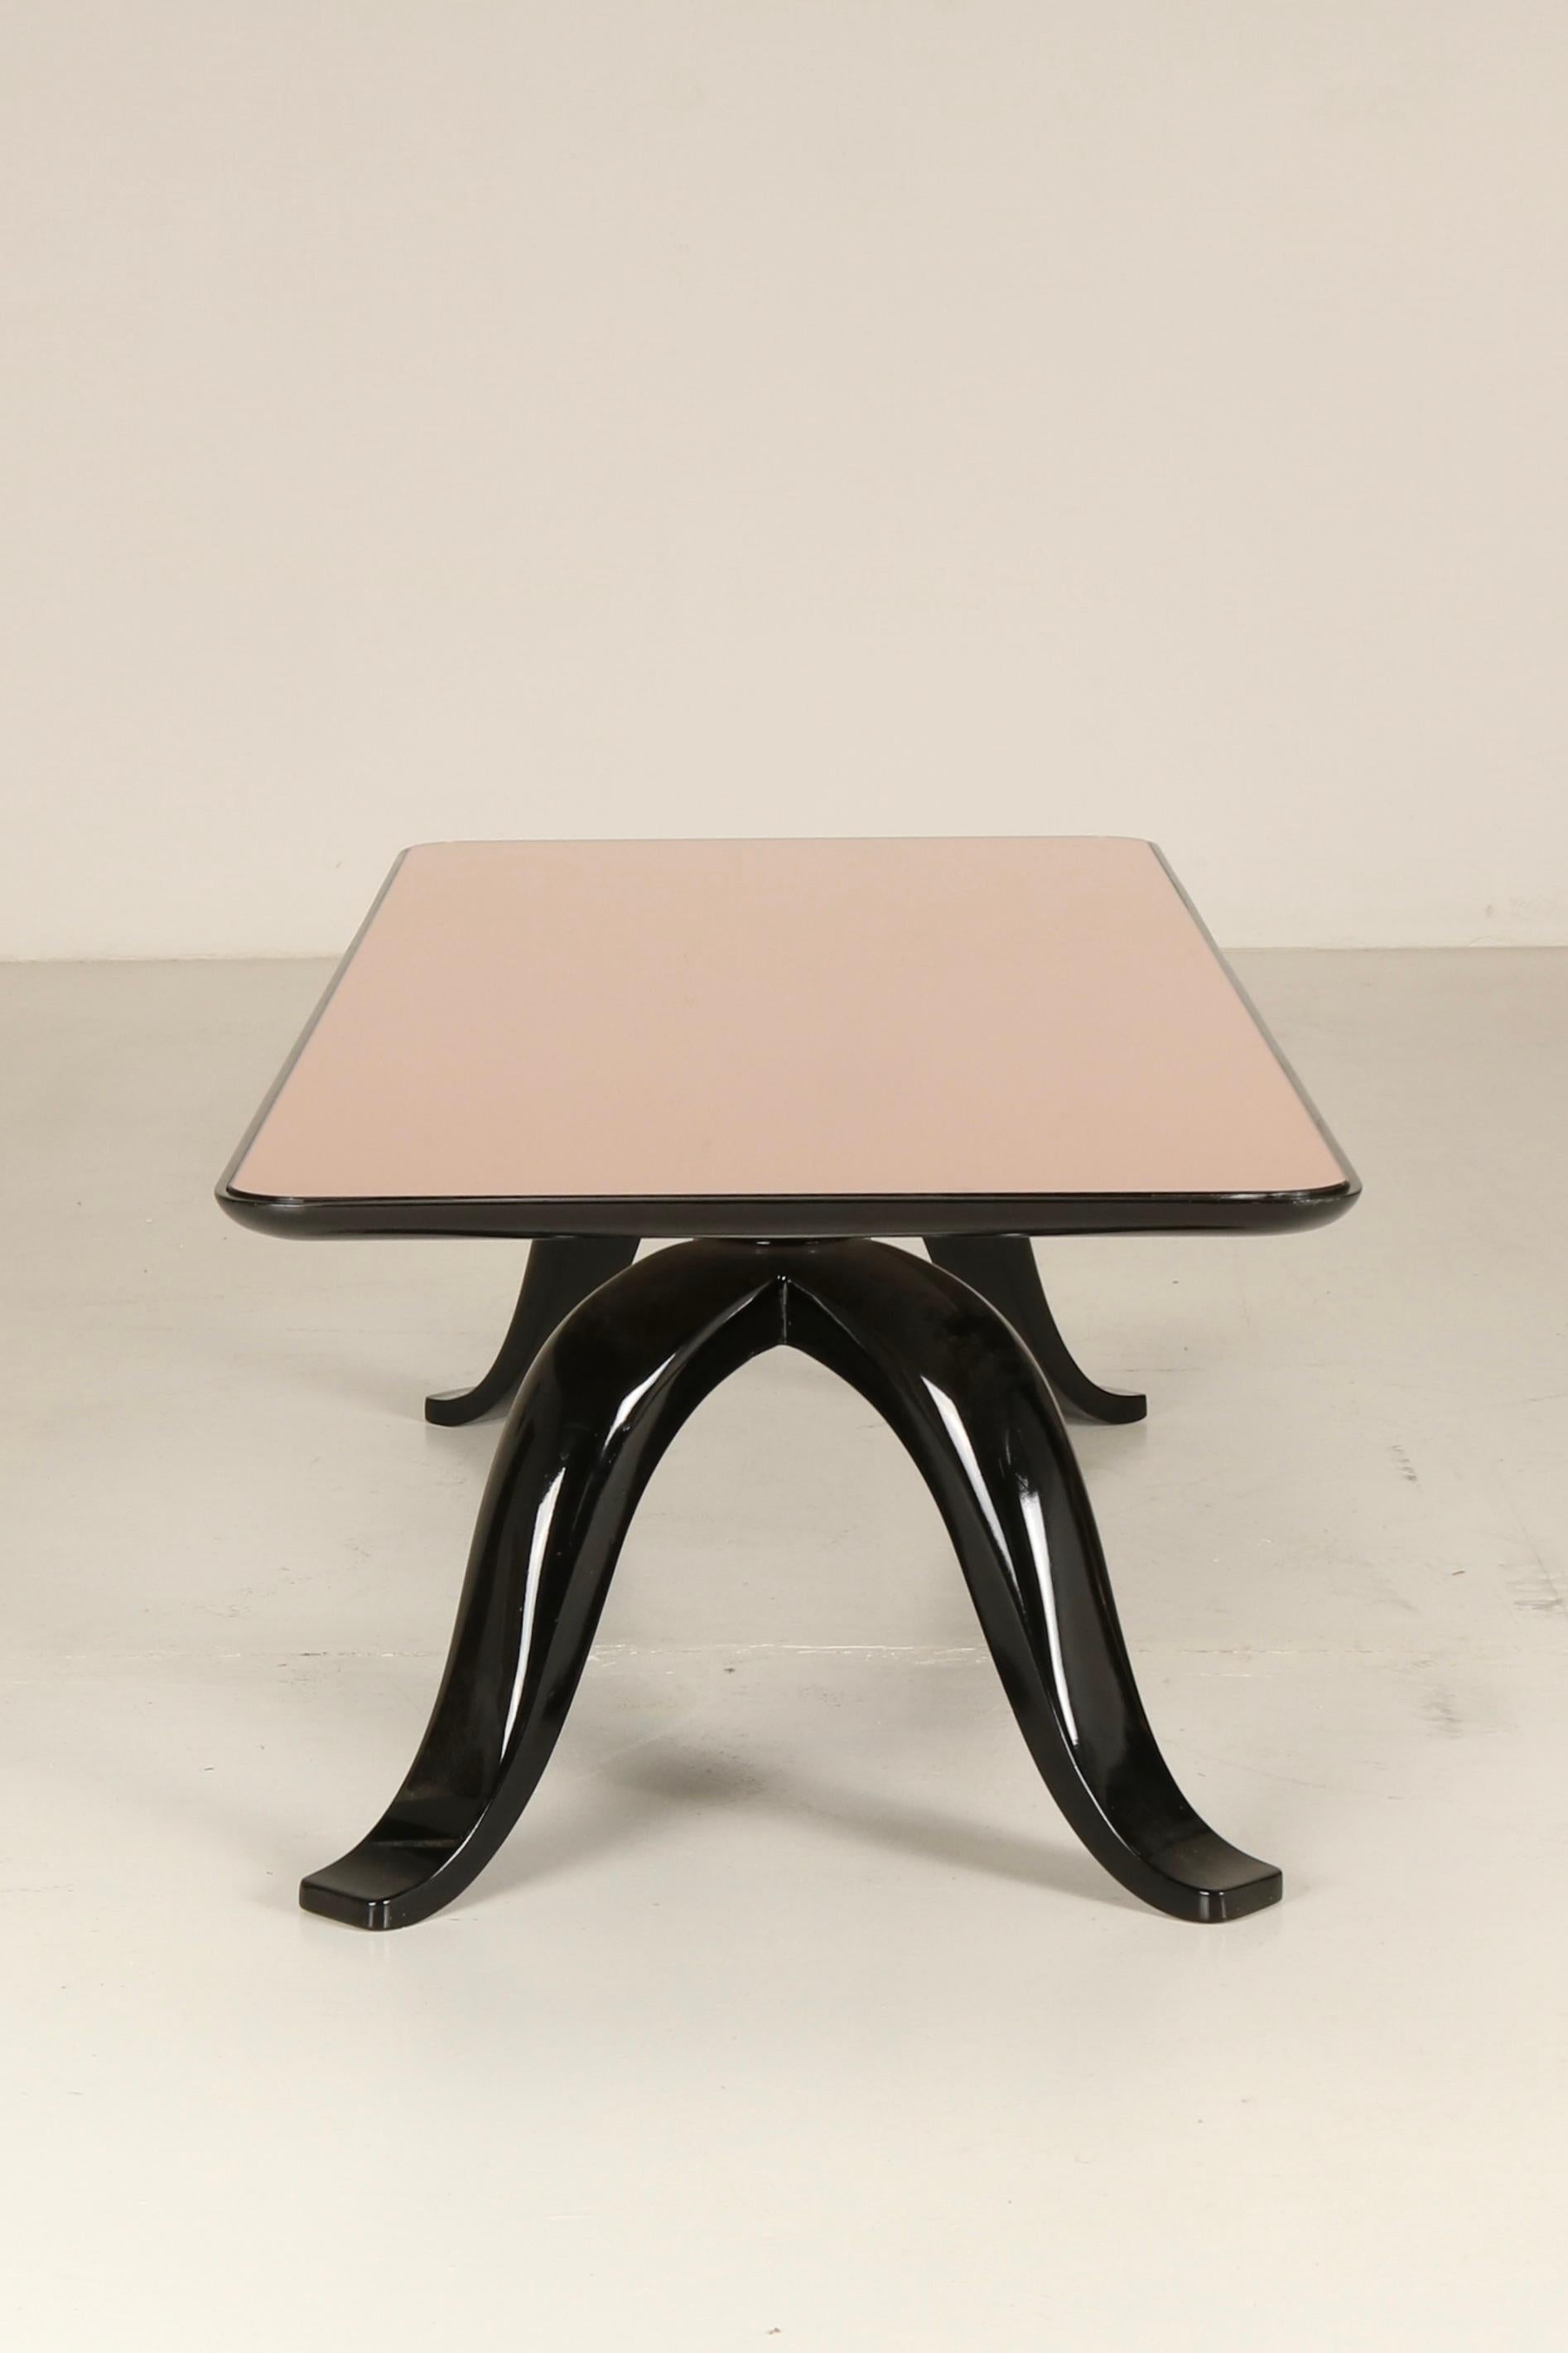 Glass Pink Mirrored Low Table By Pietro Chiesa, Fontana Arte, Italian Design '30 For Sale